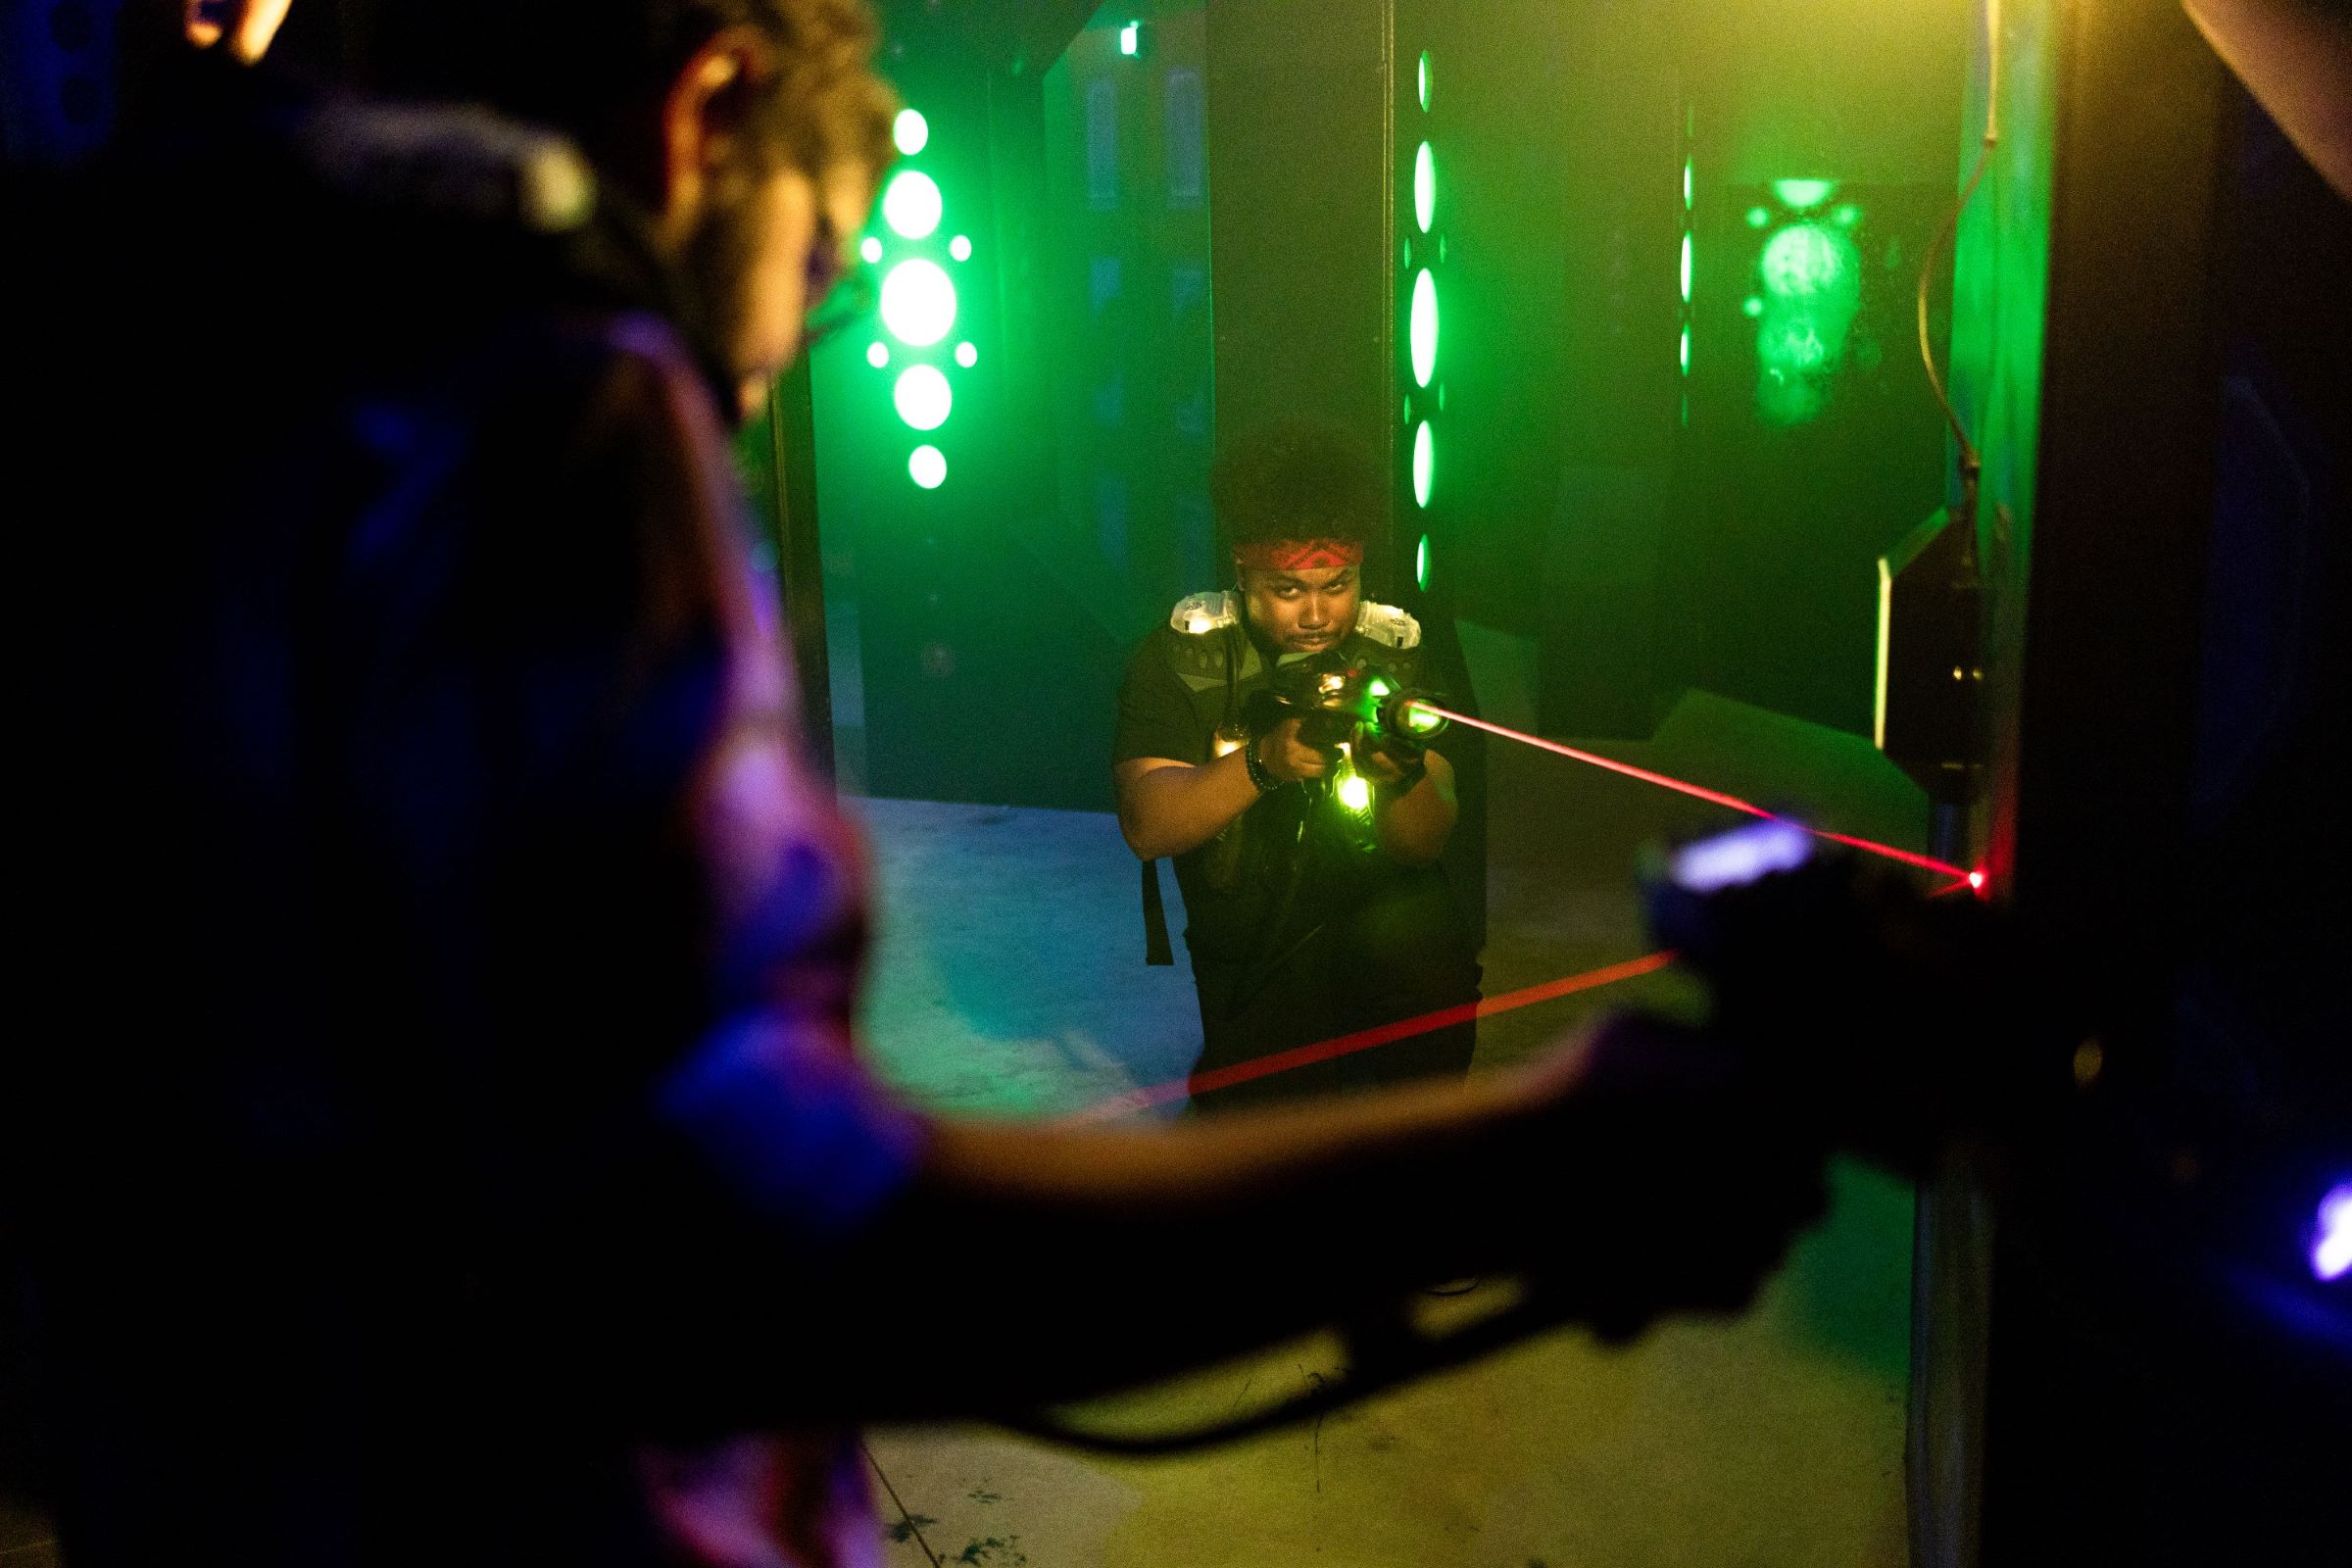 Man shooting a laser tag phaser and reflecting the laser off a mirror to tag another player